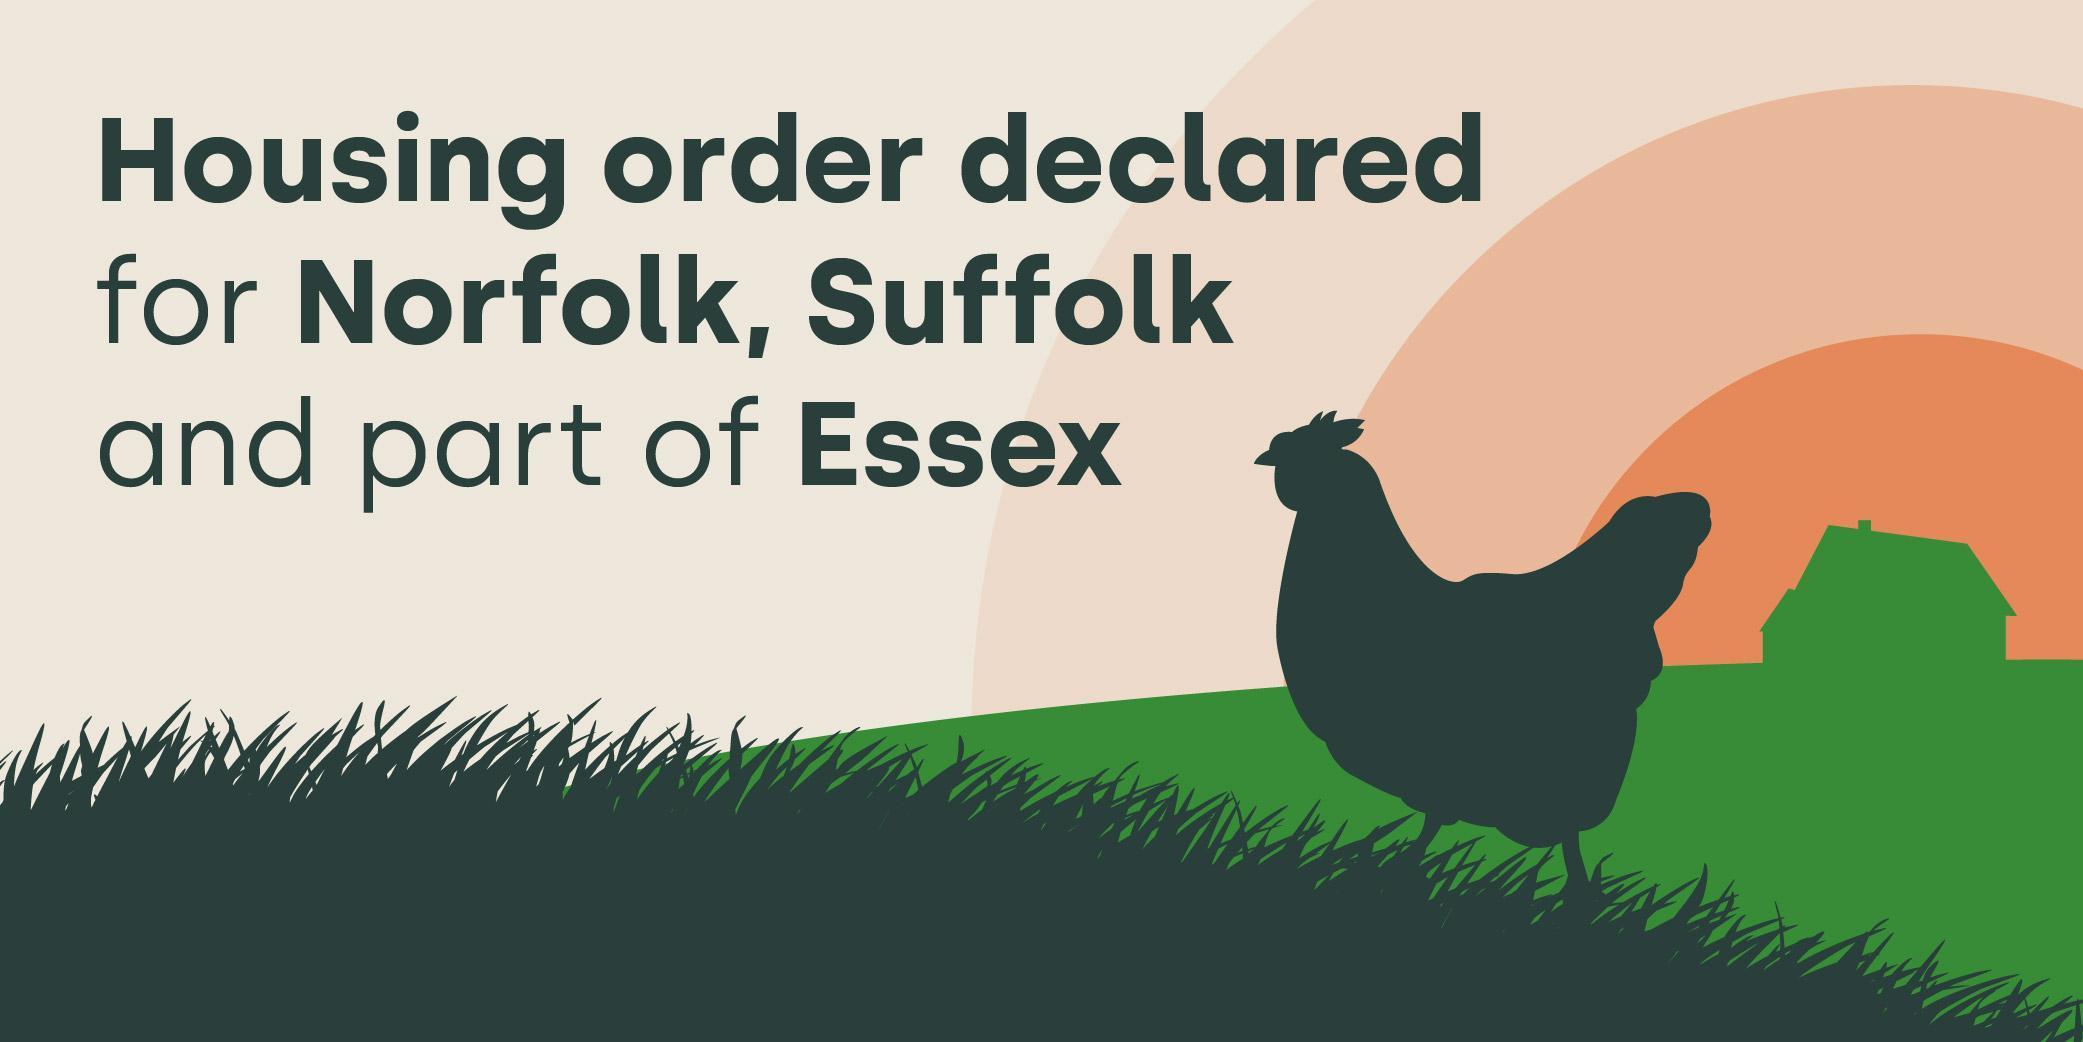 Housing order declared for Norfolk, Suffolk and part of Essex